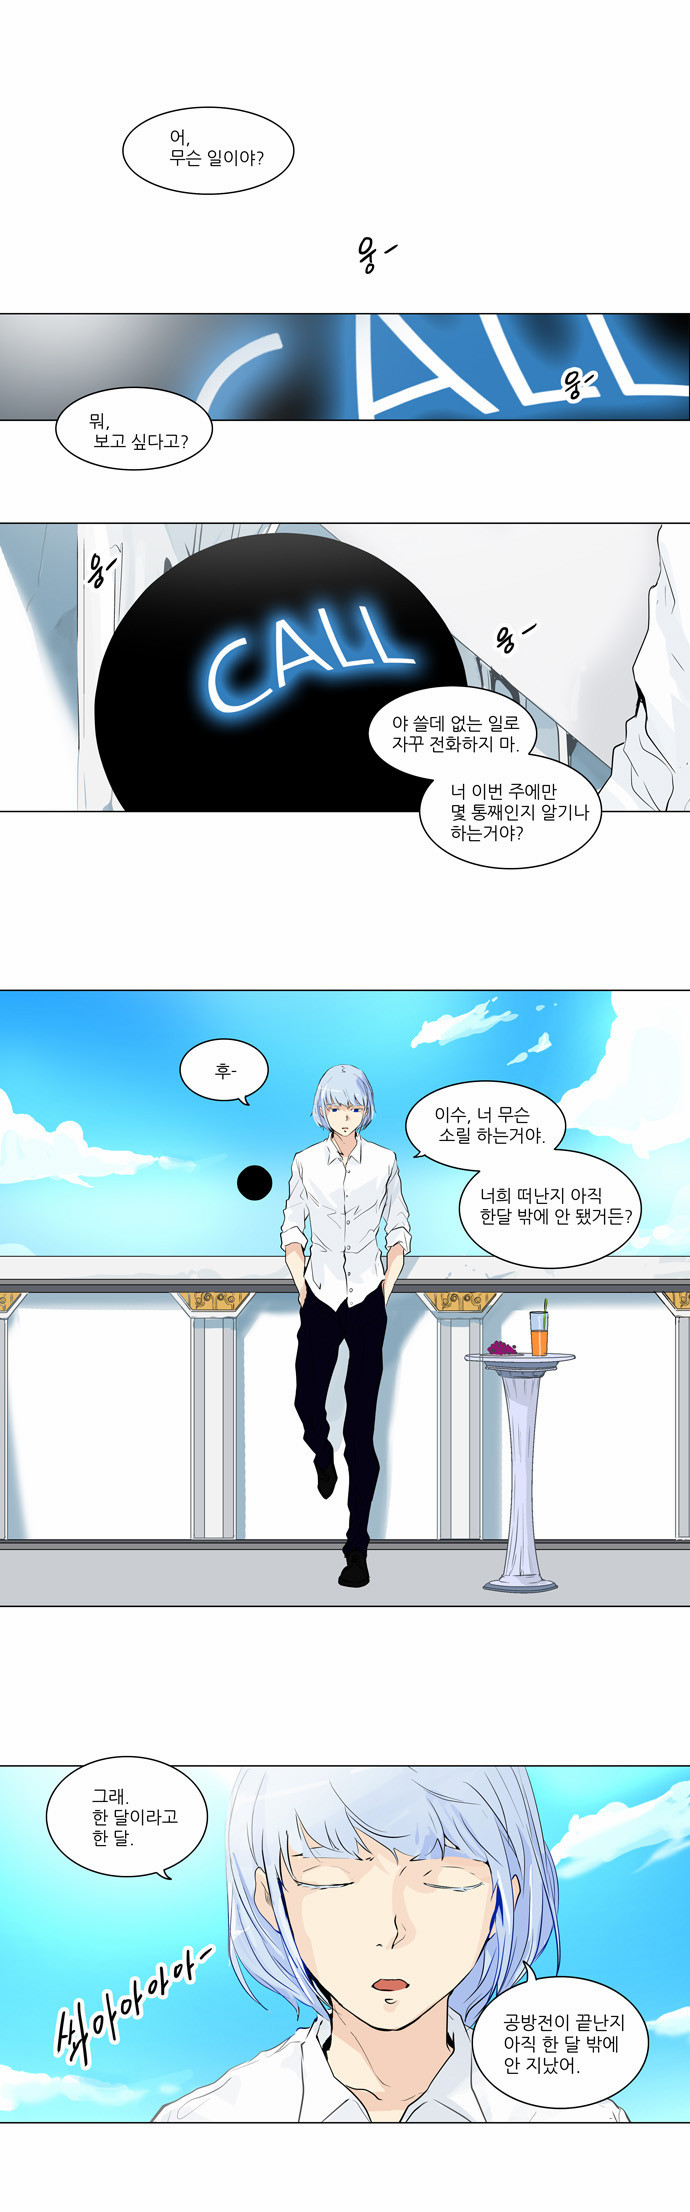 Tower of God - Chapter 193 - Page 1